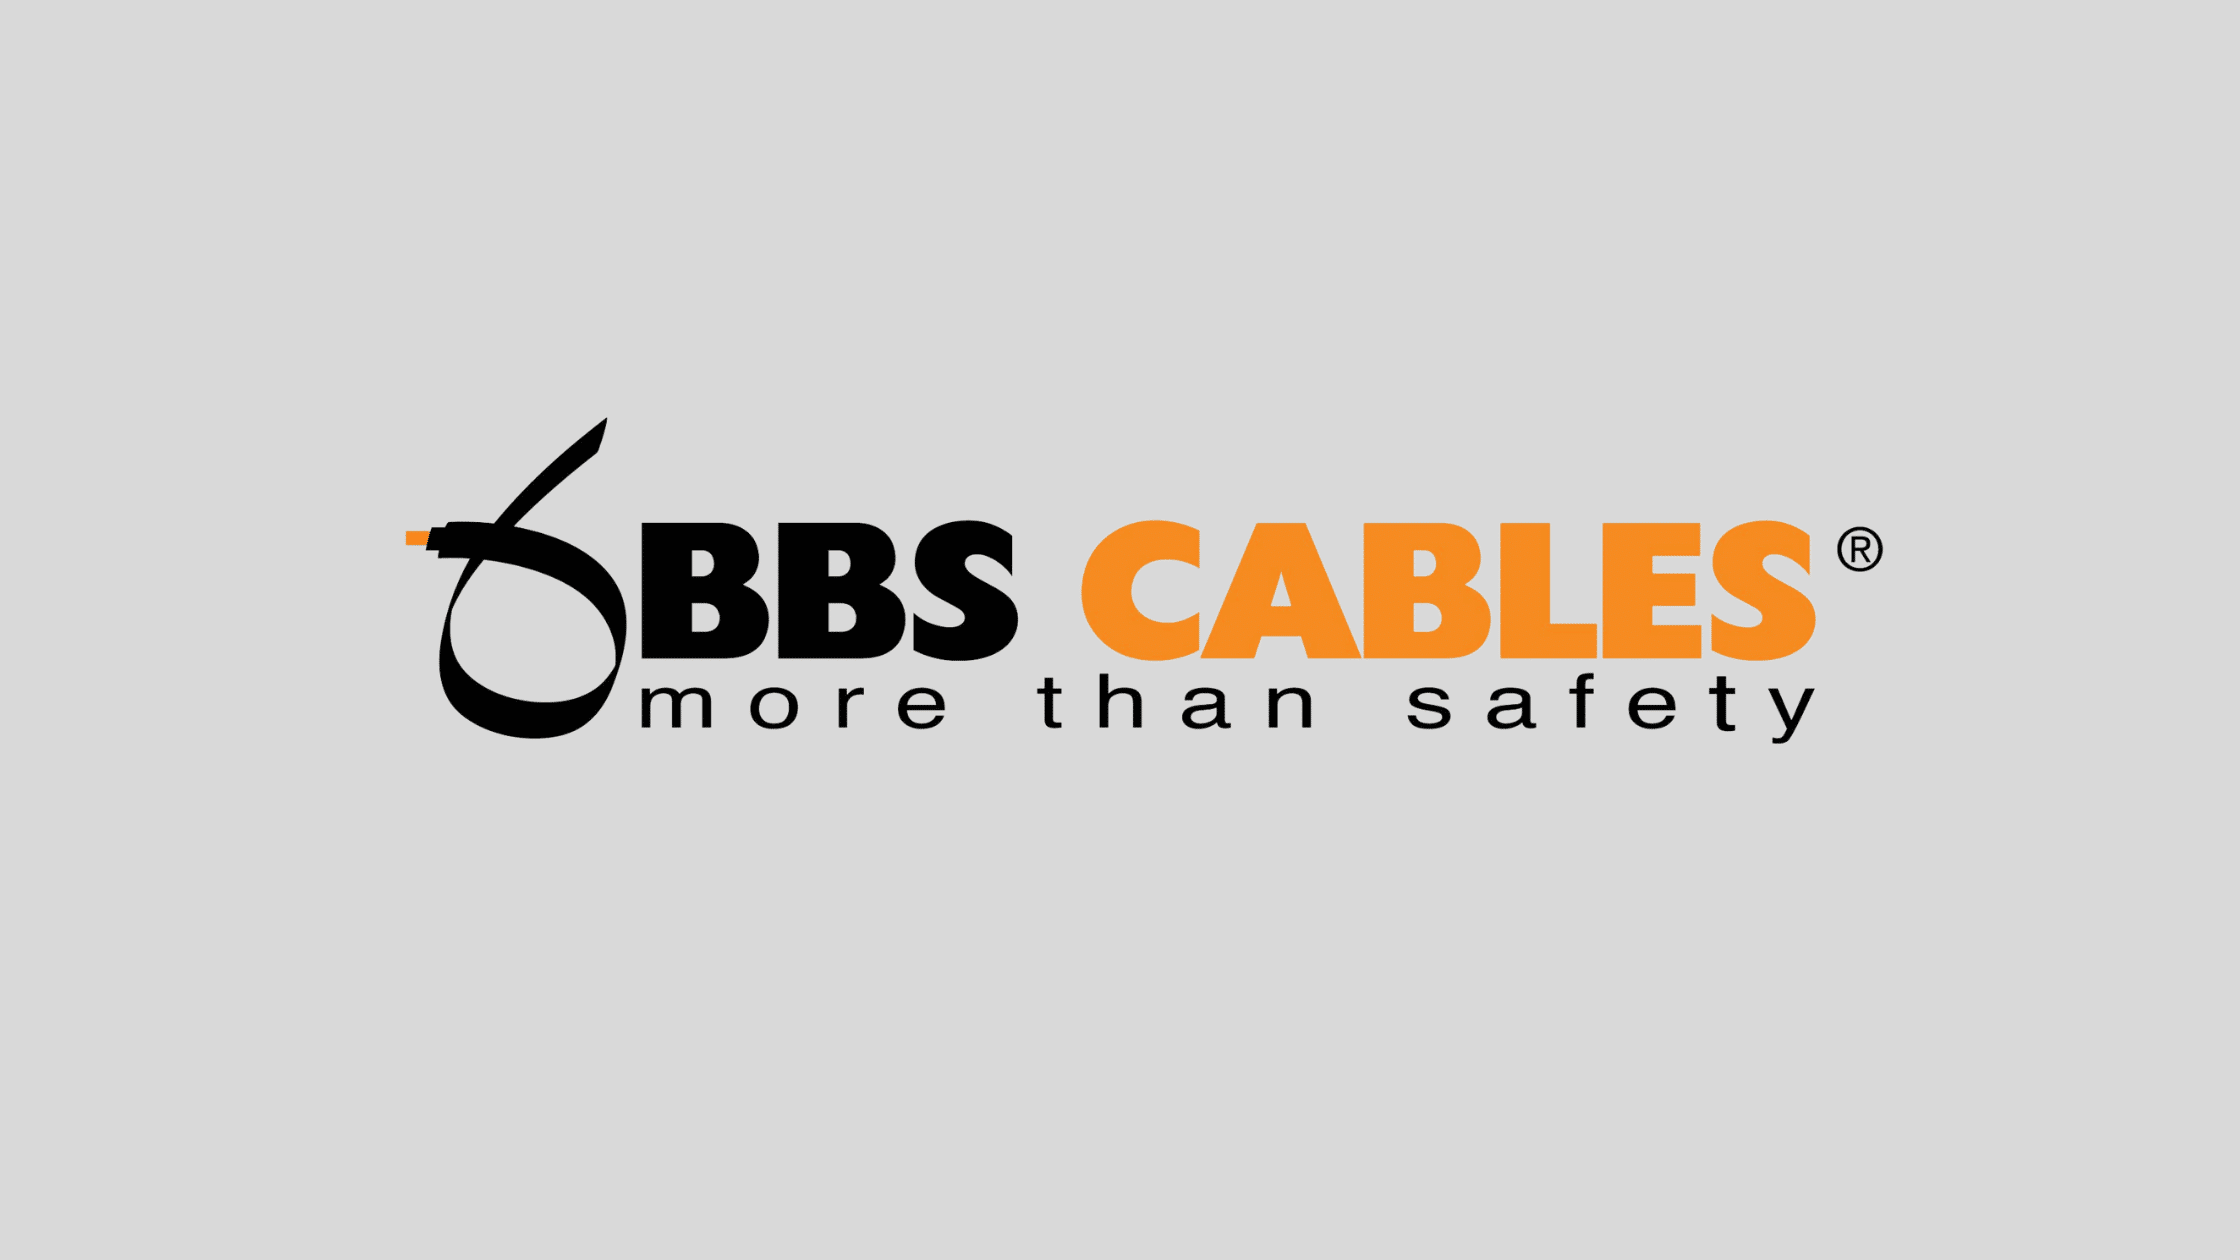 BBS Cables plans to export cables after the end of Covid 19